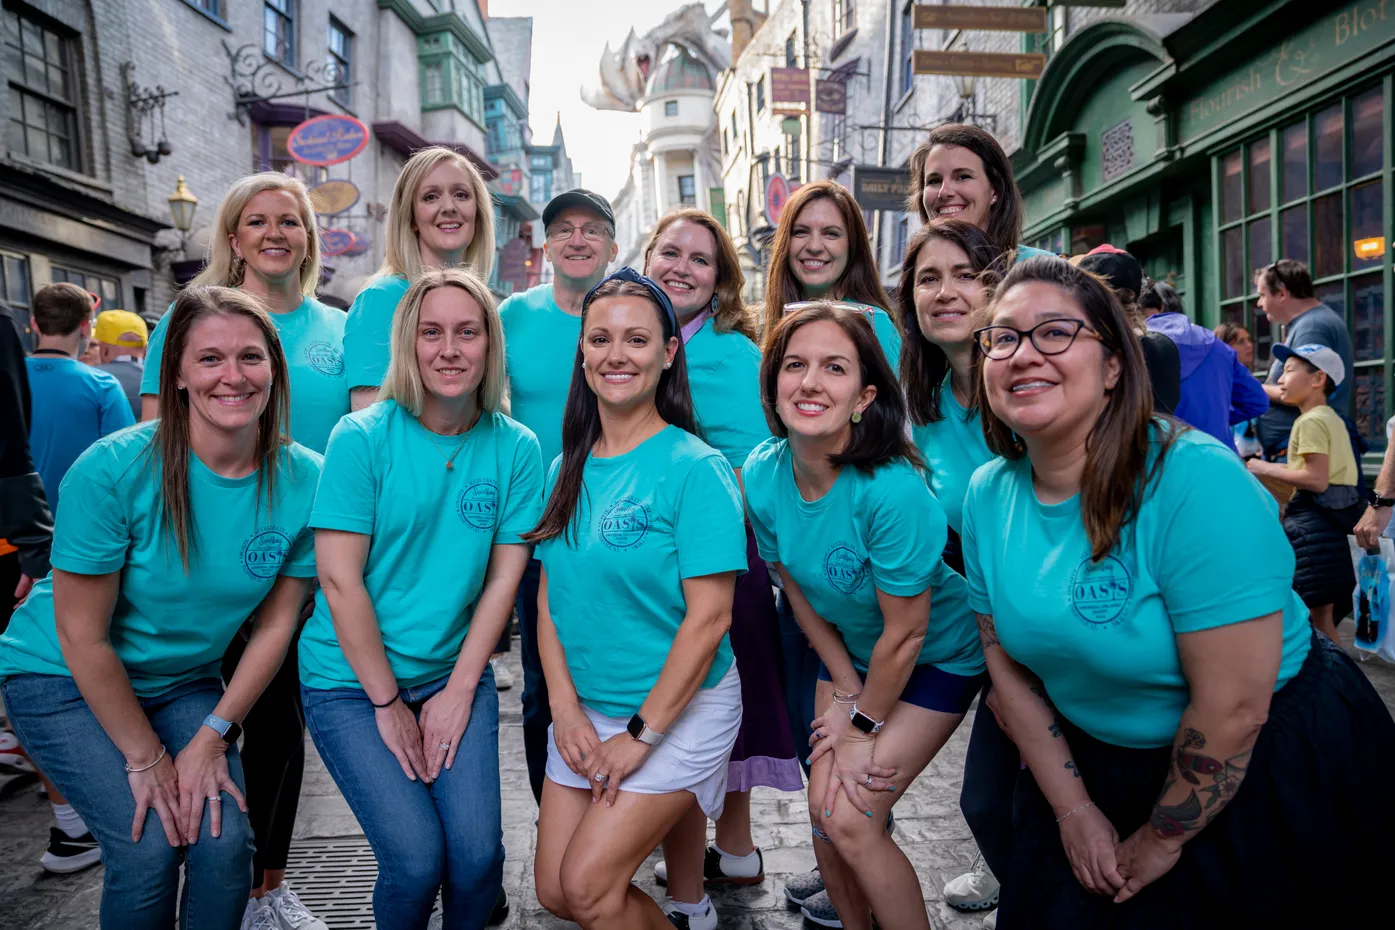 Sweetbay travel advisors in Diagon alley